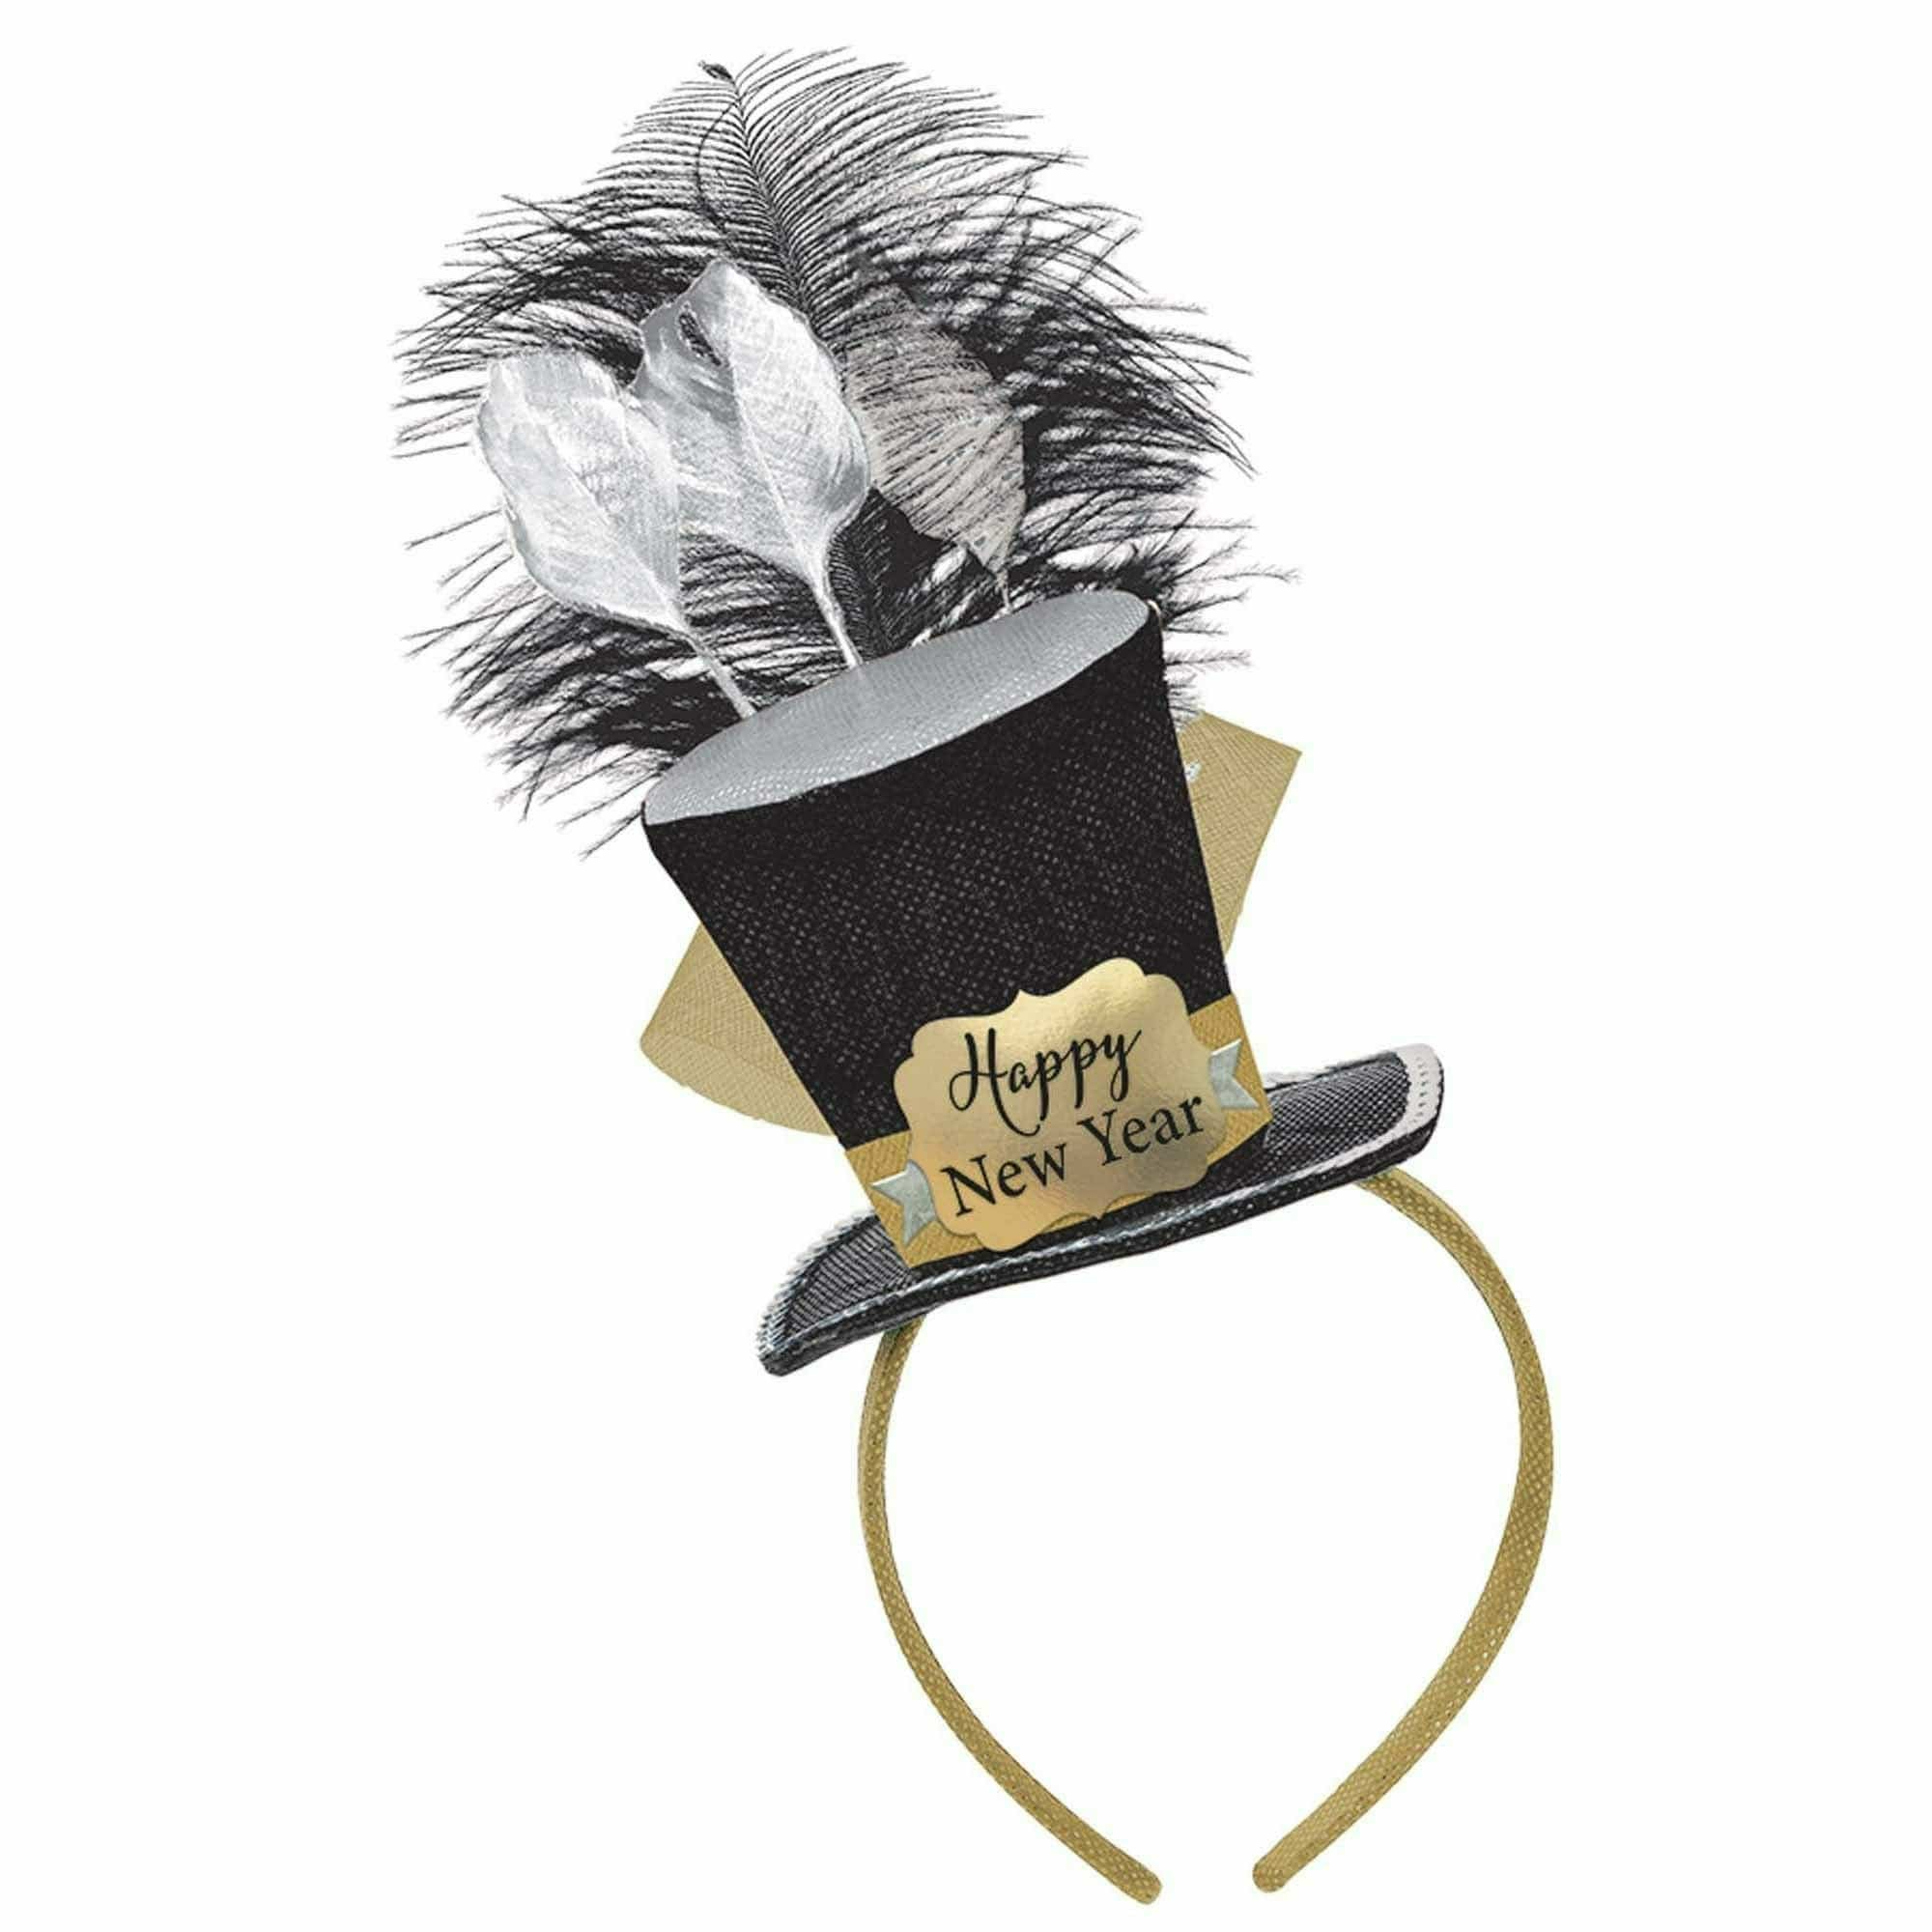 Amscan HOLIDAY: NEW YEAR'S Top Hat Fascinator - Black, Silver, Gold